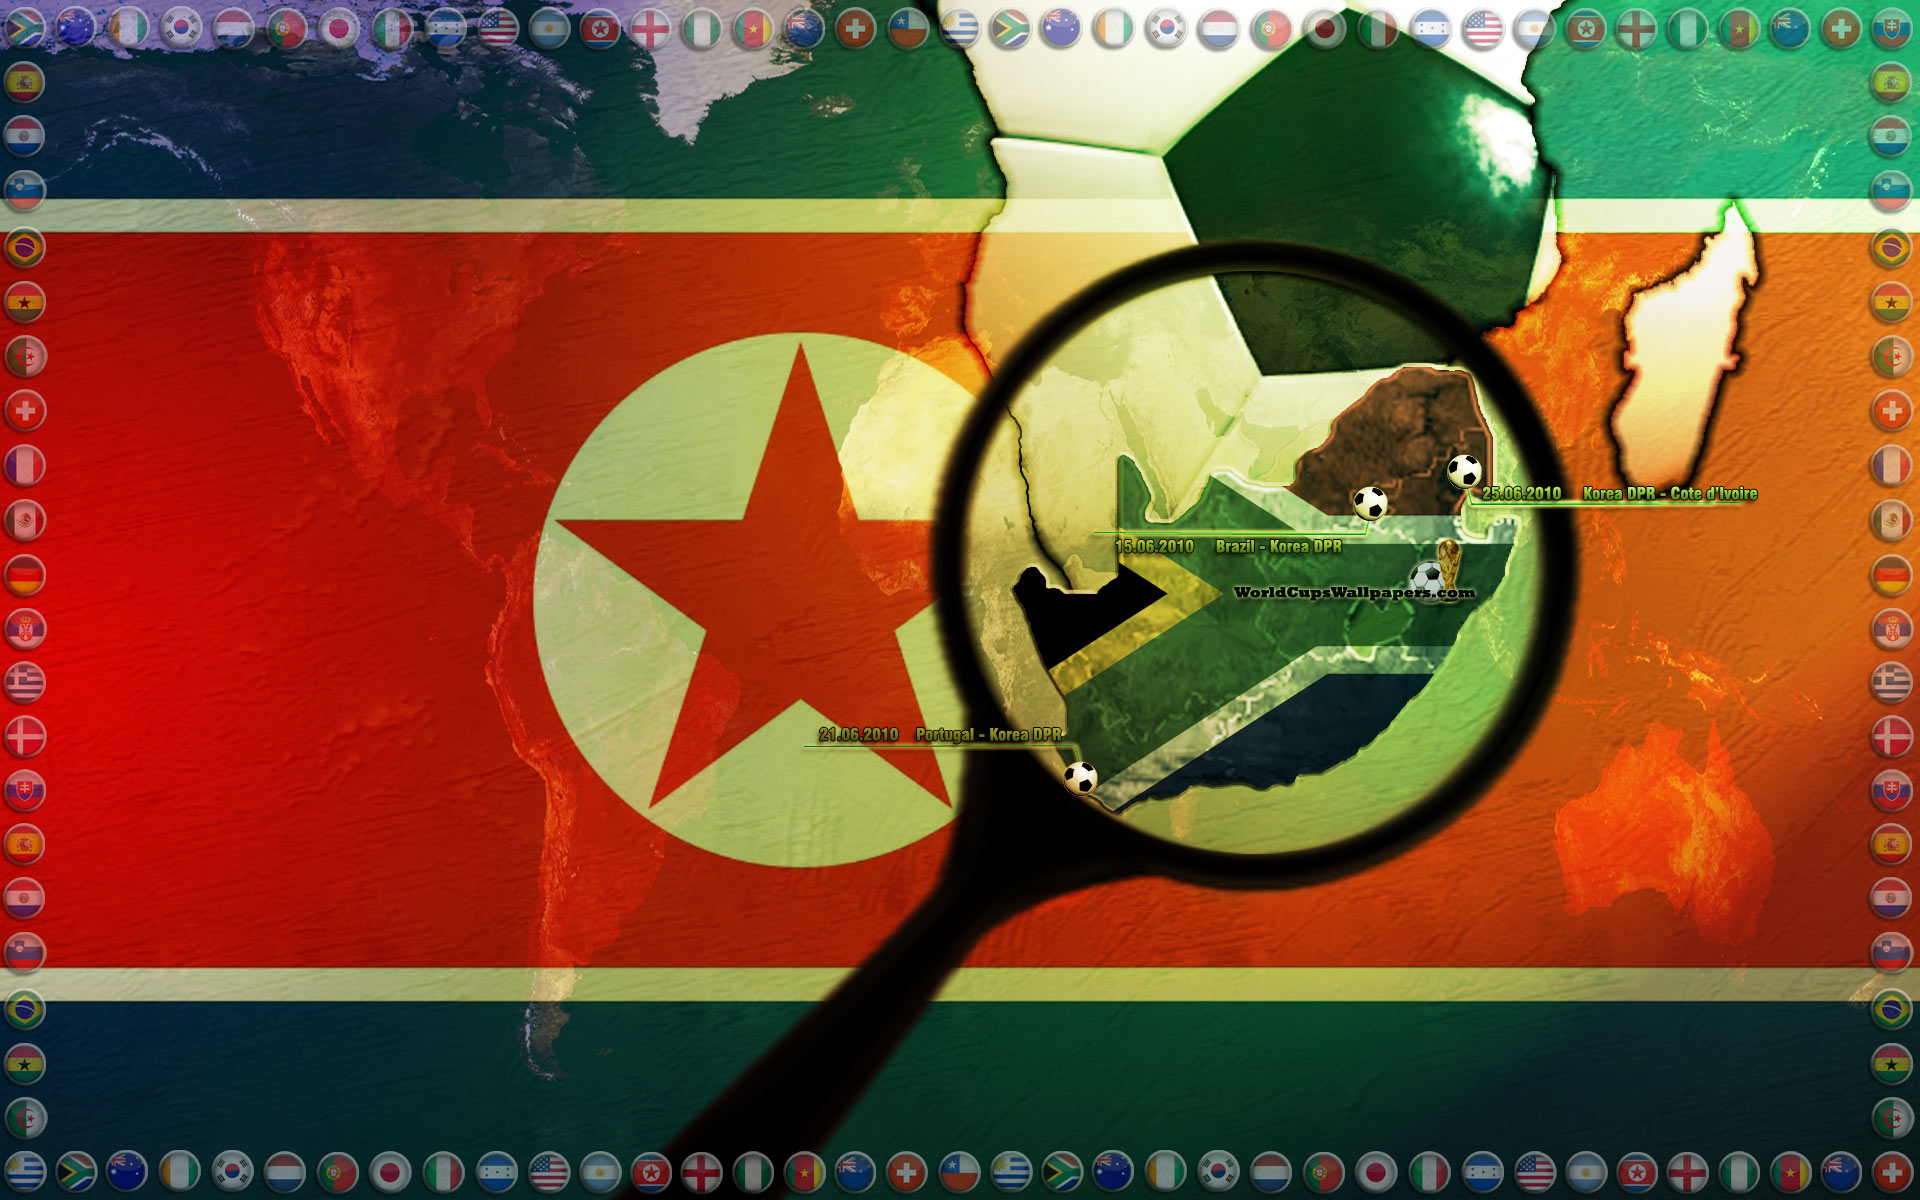 North Korea FIFA World Cup 2010 wallpapers and images   wallpapers